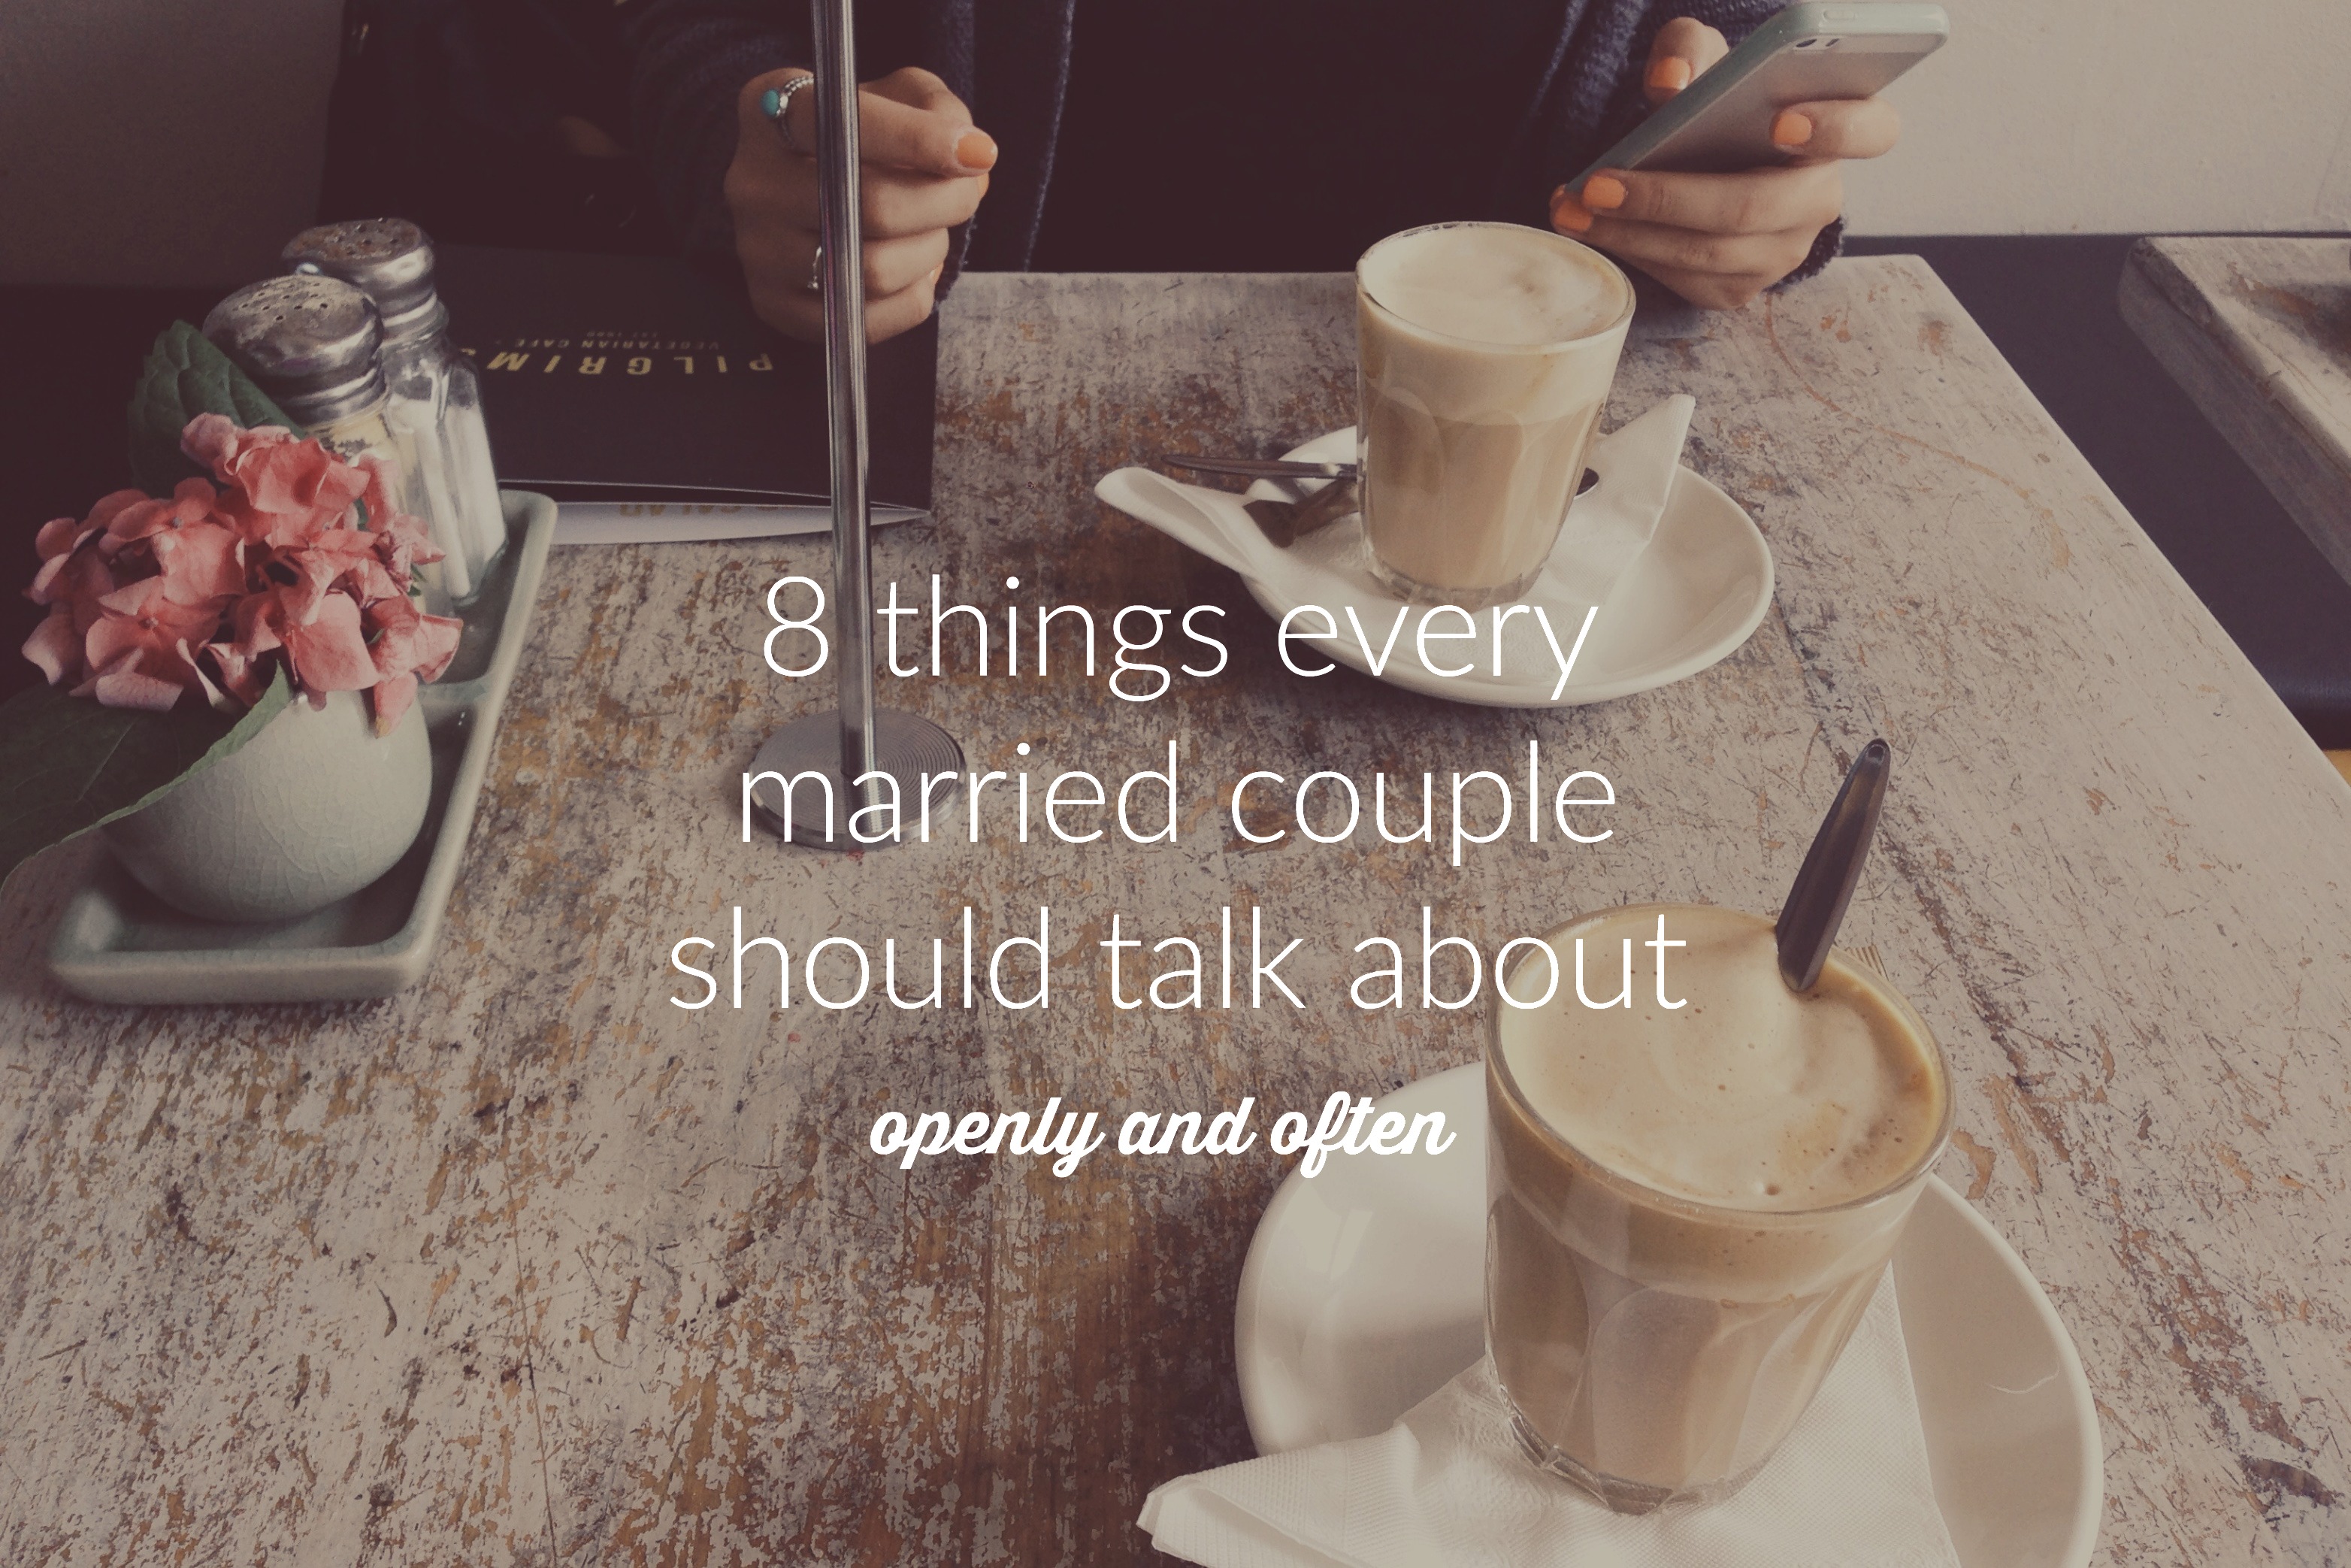 Now a lot of married couples would probably tell you that they can talk to their spouse about anything. But is that really true? I’ve actually come across a lot who have a hard time even bringing certain subjects up in their own marriages. Cross-check this list and see if these subjects come up regularly in your own marriage. If they don’t- maybe it’s time they should!